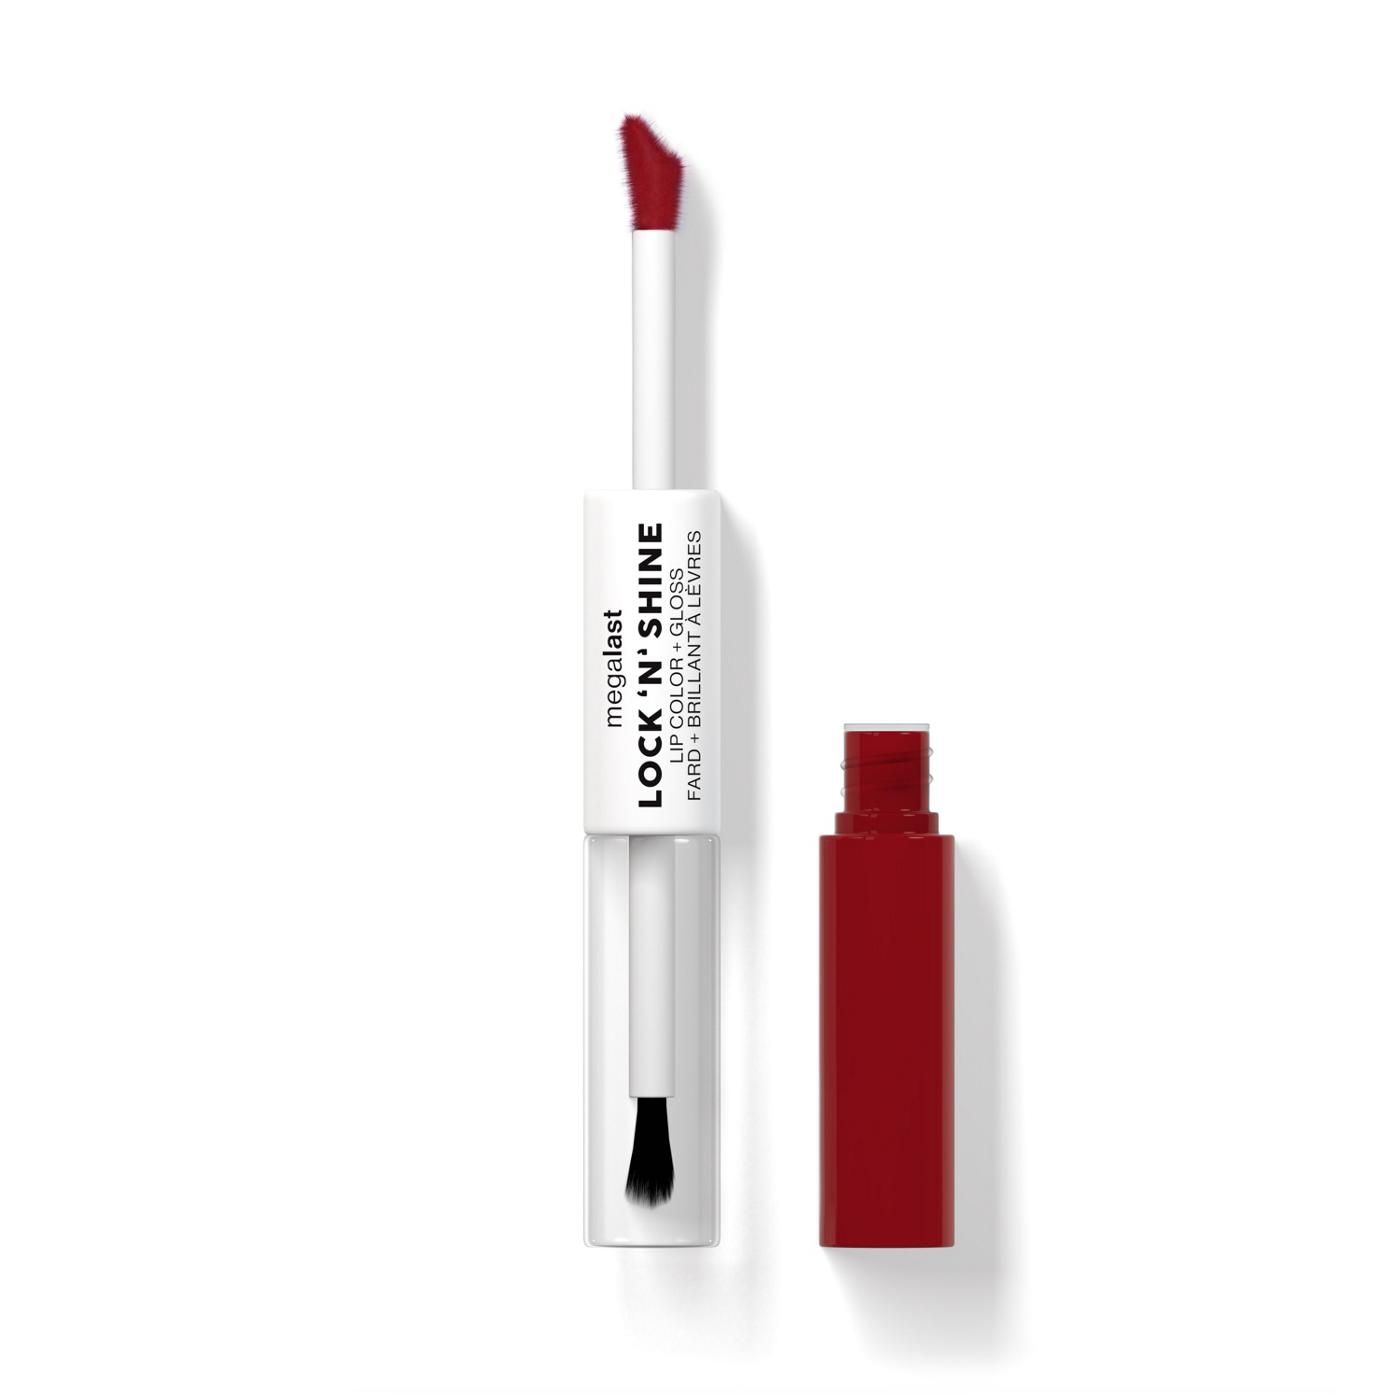 Wet n Wild MegaLast Lock N Shine Lip Gloss - Red Y for You; image 3 of 3